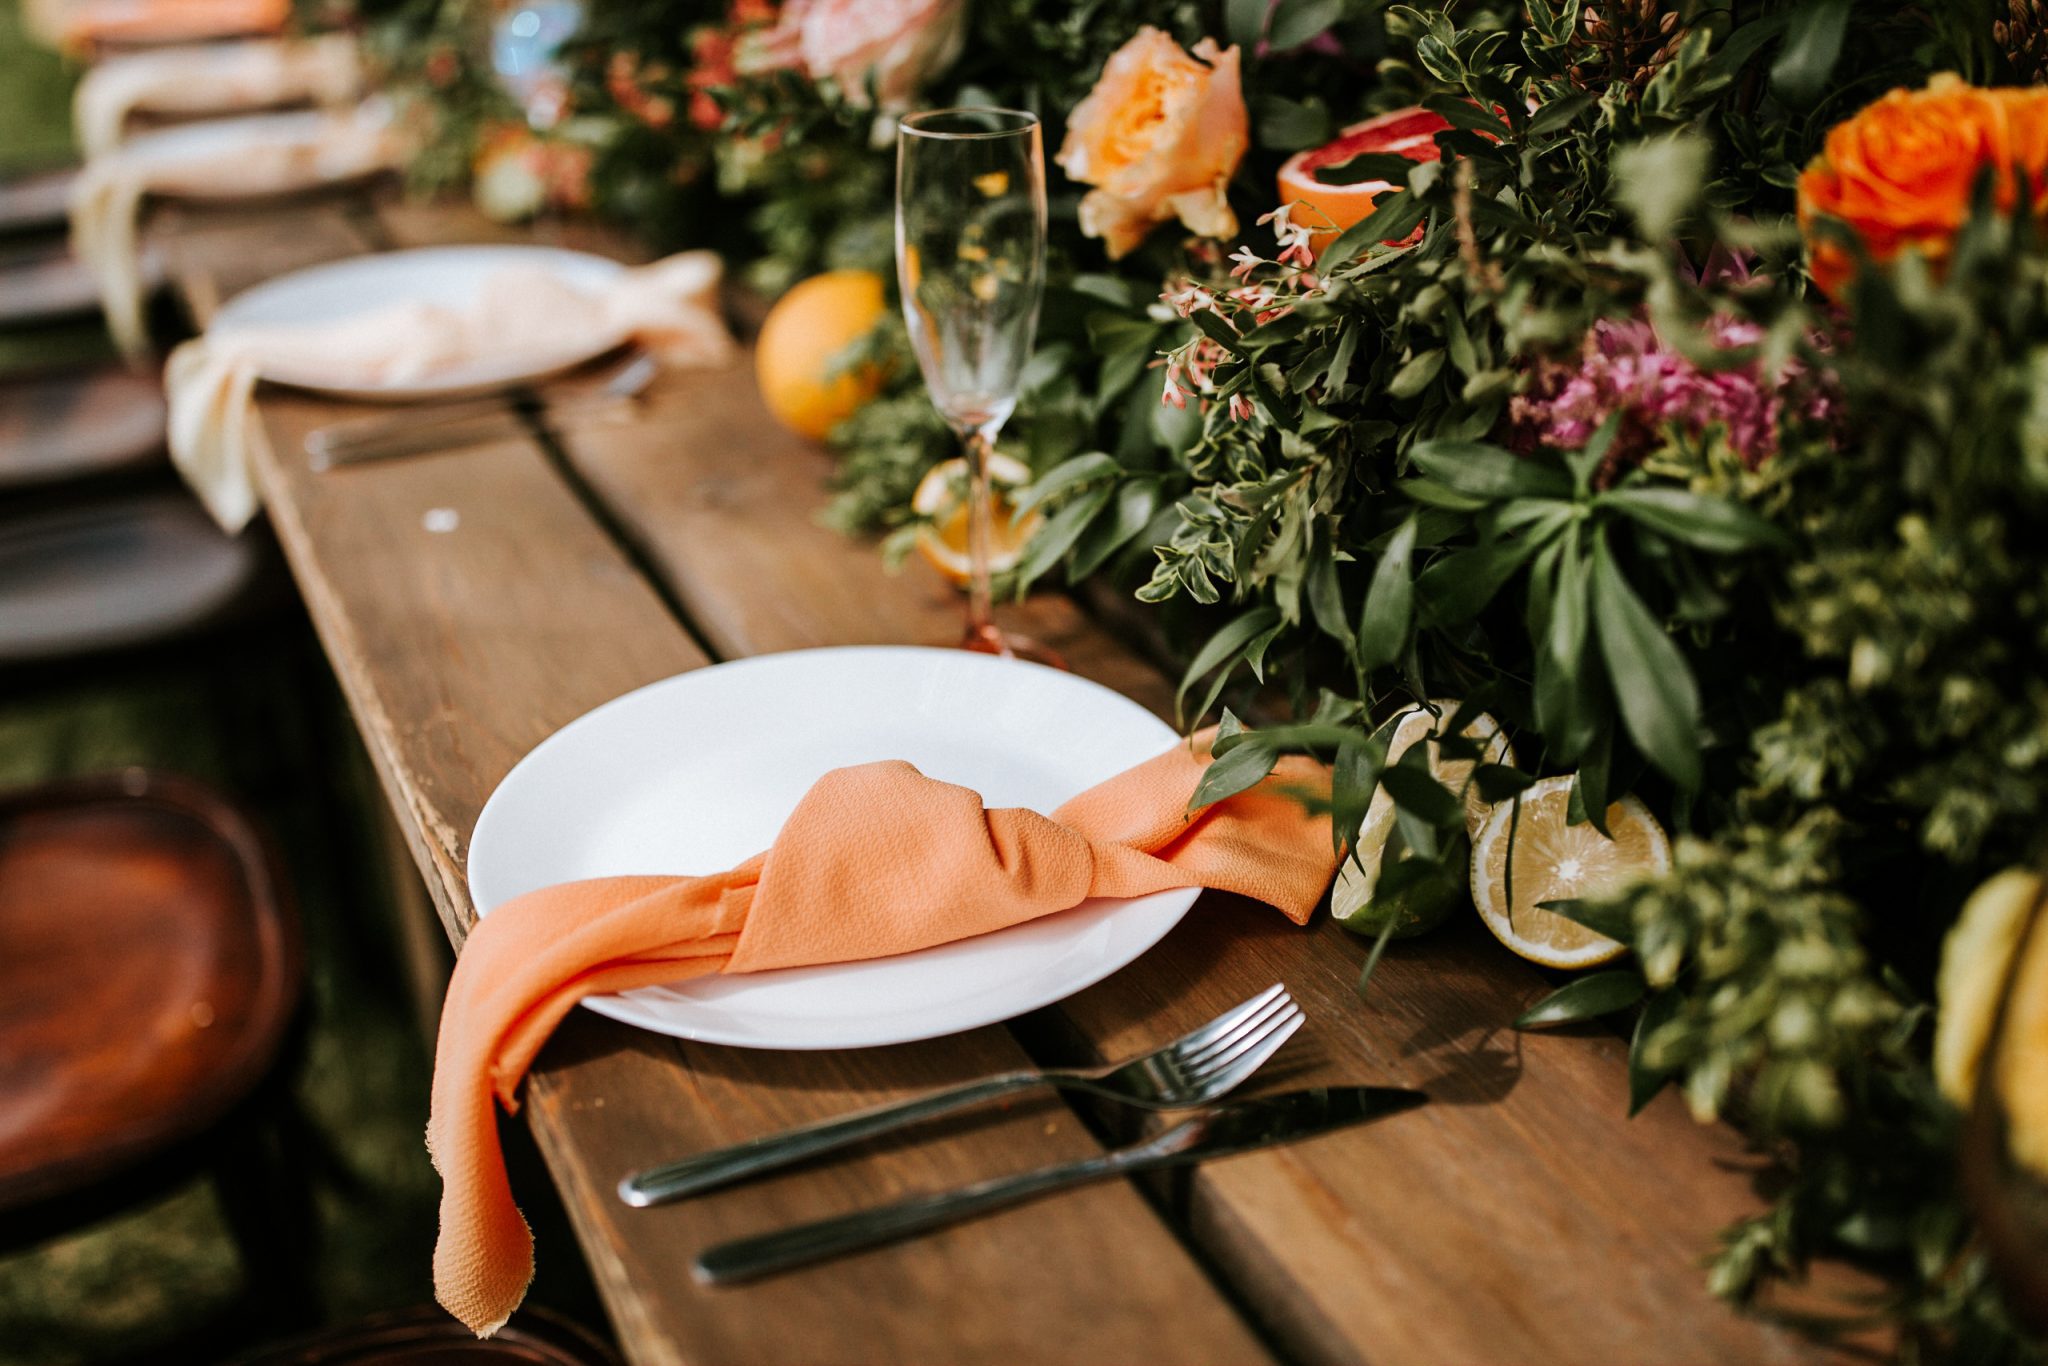 Wedding Table & Styling Inspiration - local wedding advice and inspiration featured on Bronte Bride